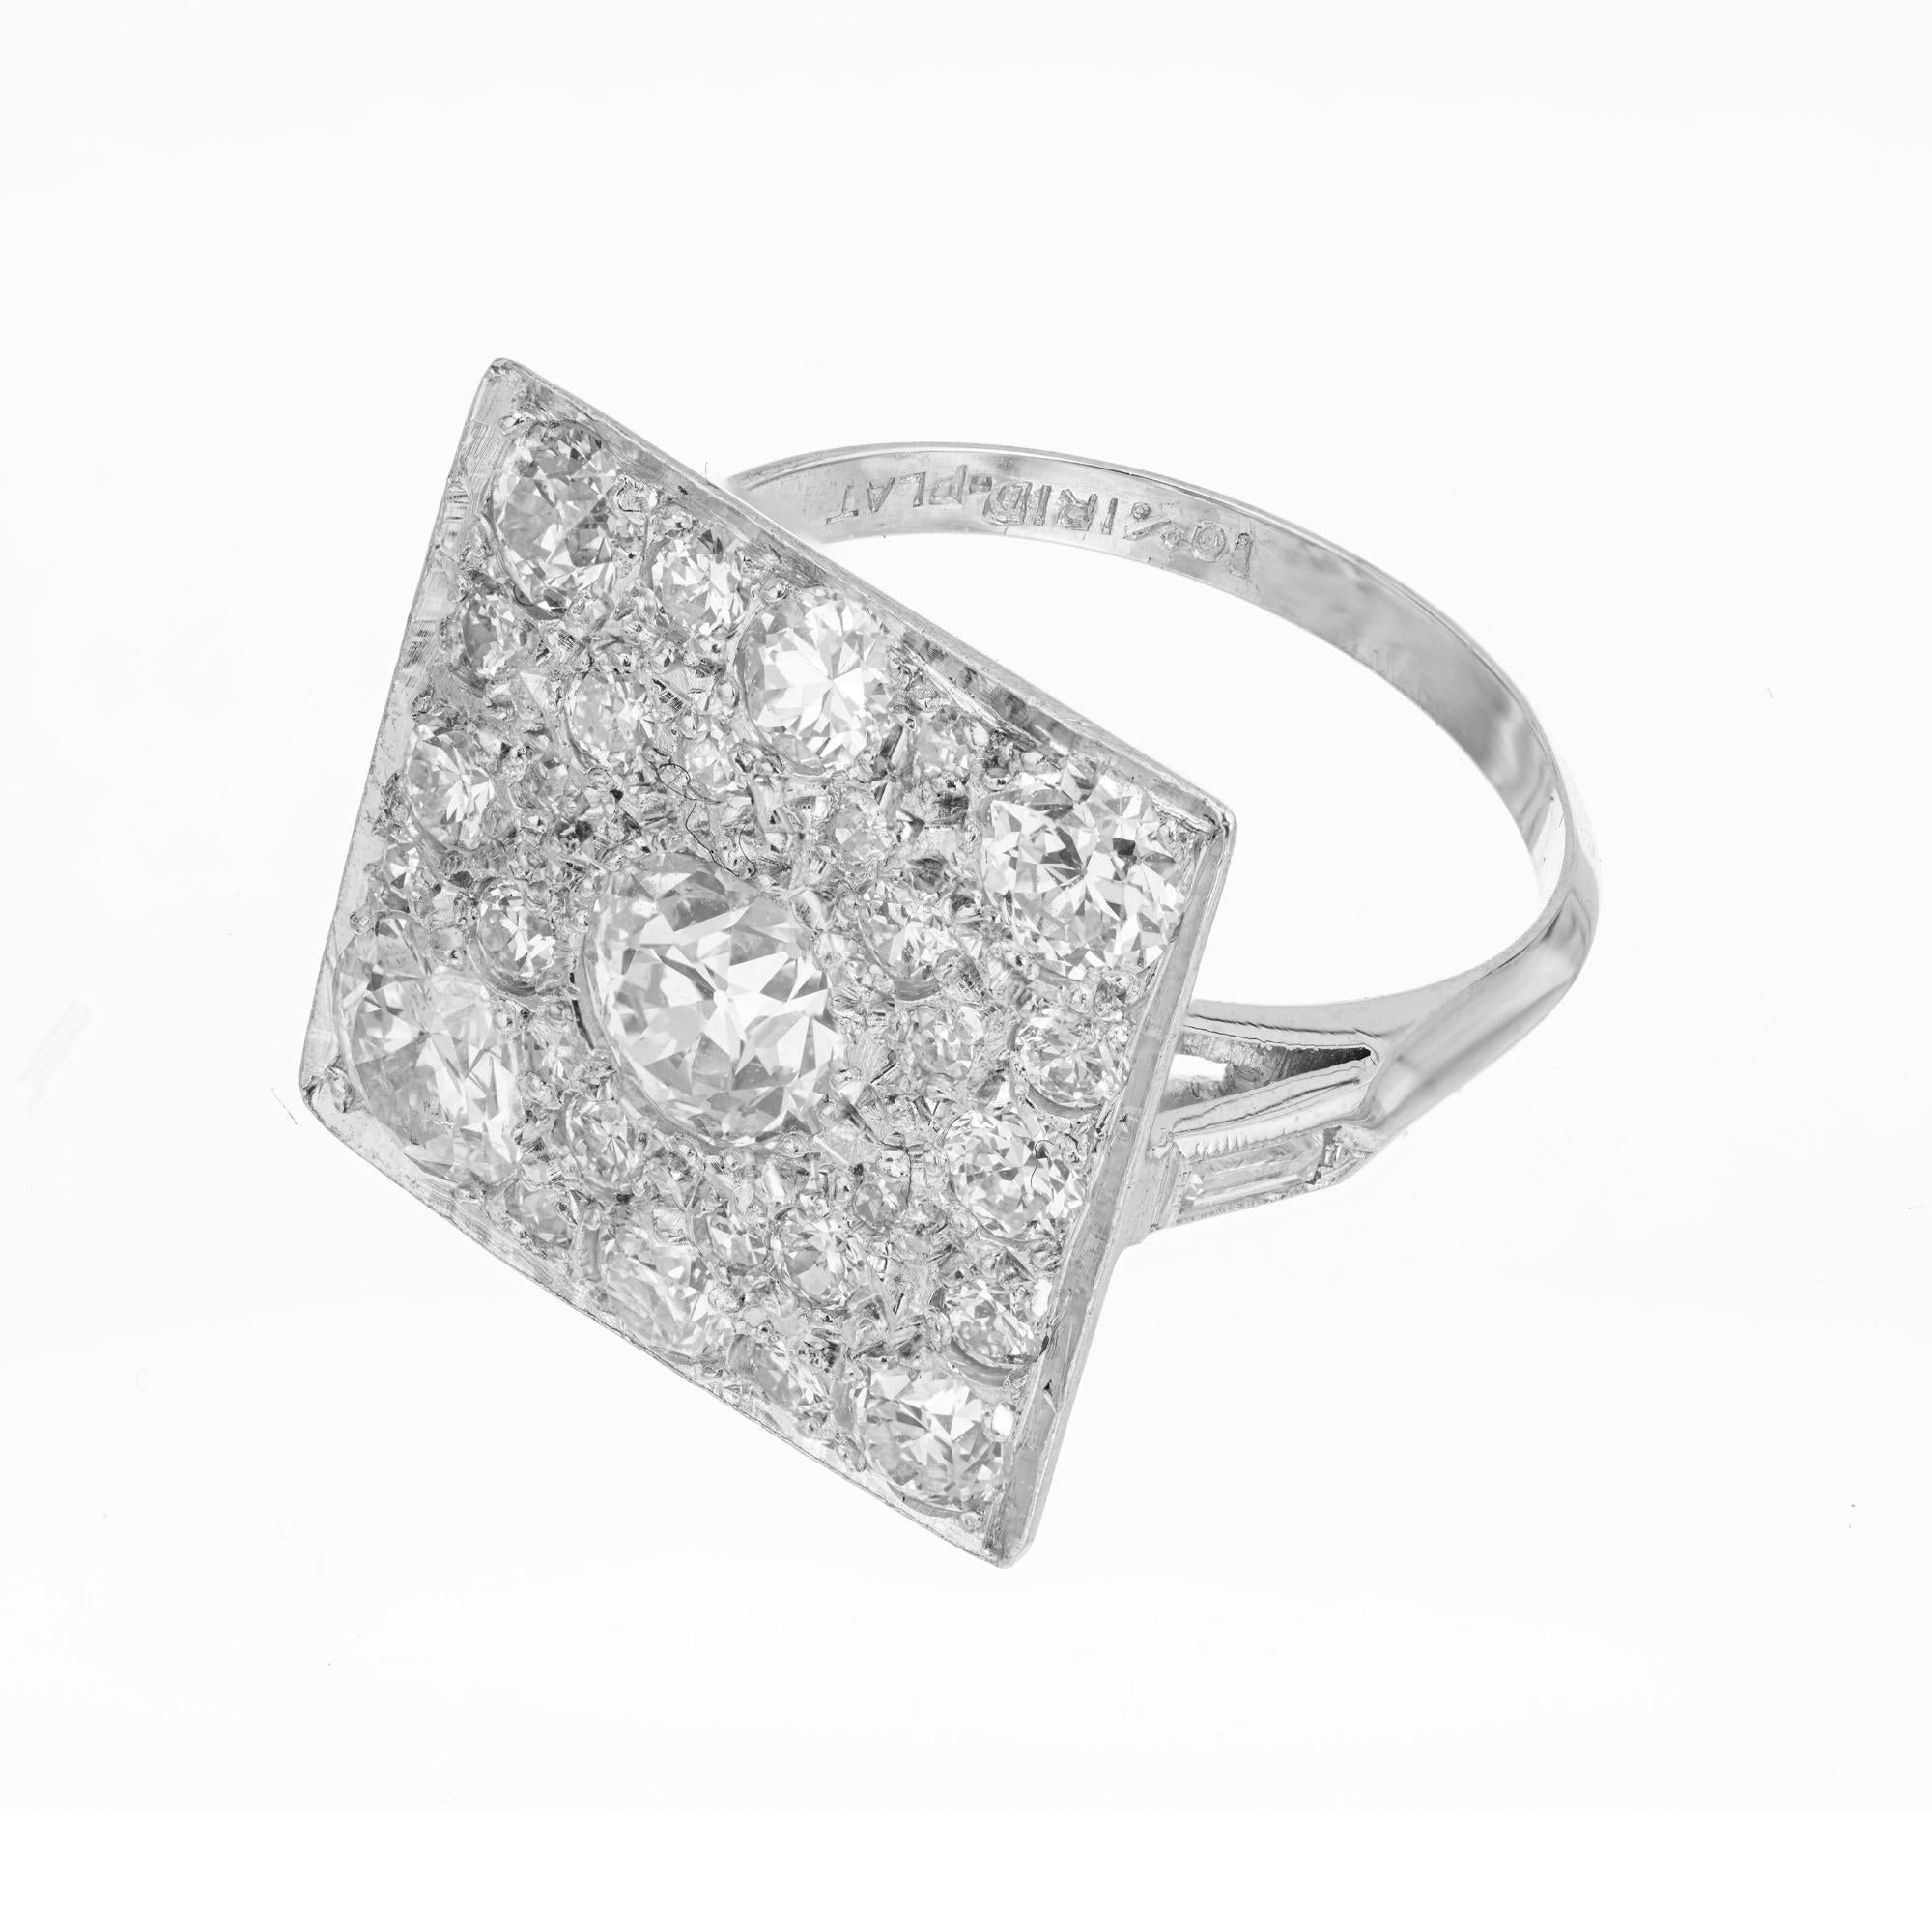 1930's square top diamond cluster cocktail ring. .75ct Old European center diamond mounted in a square top platinum setting accented with 28 different cut diamonds that include round brilliant cut, single cut, old mine cut and old European cut